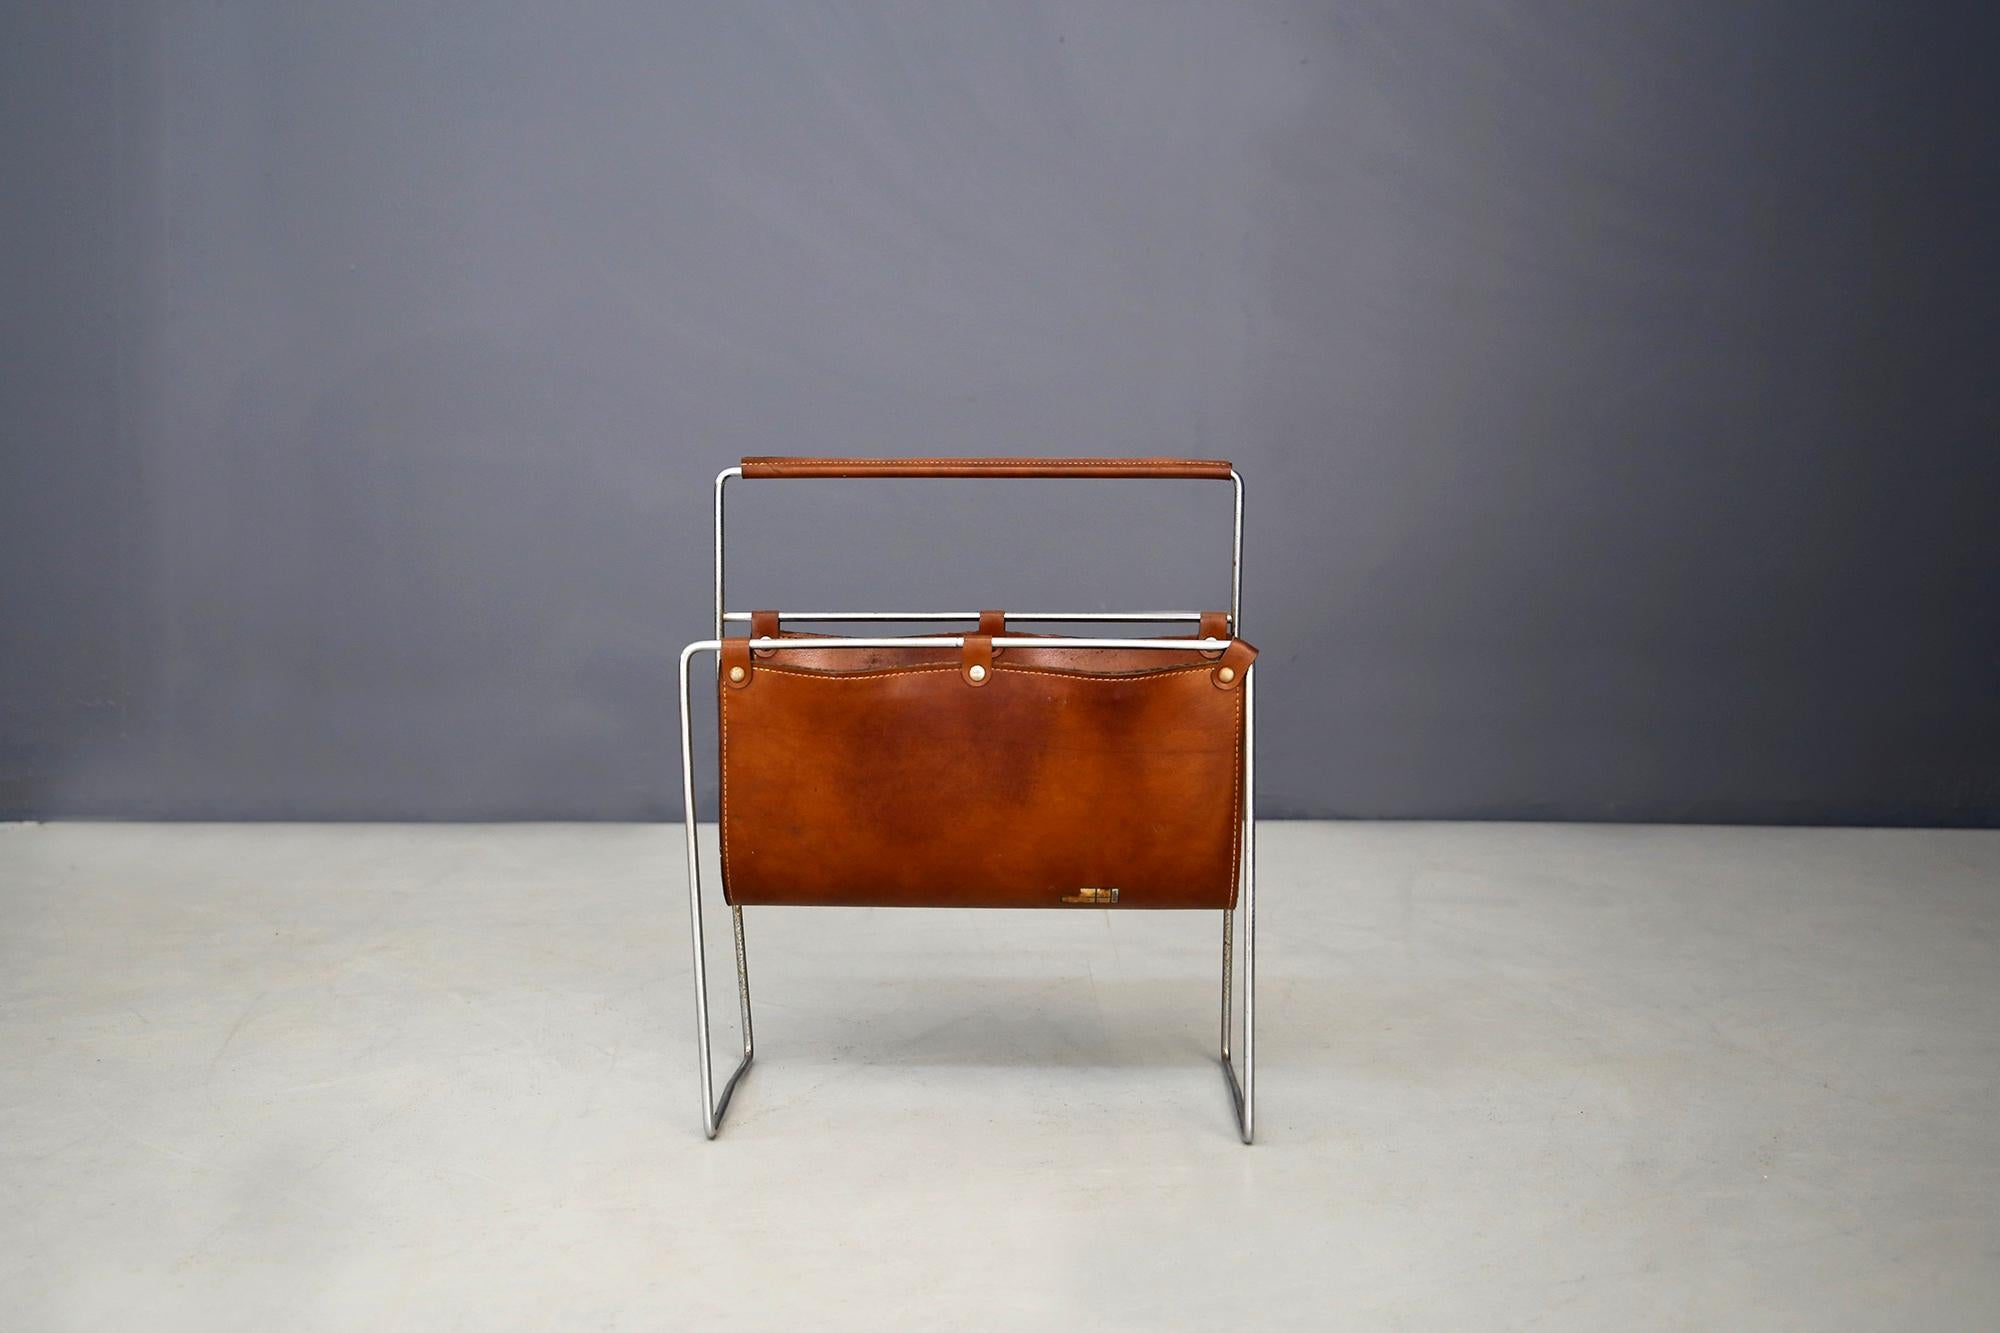 Austrian Midcentury Magazine Holder in Leather and Steel, 1950s